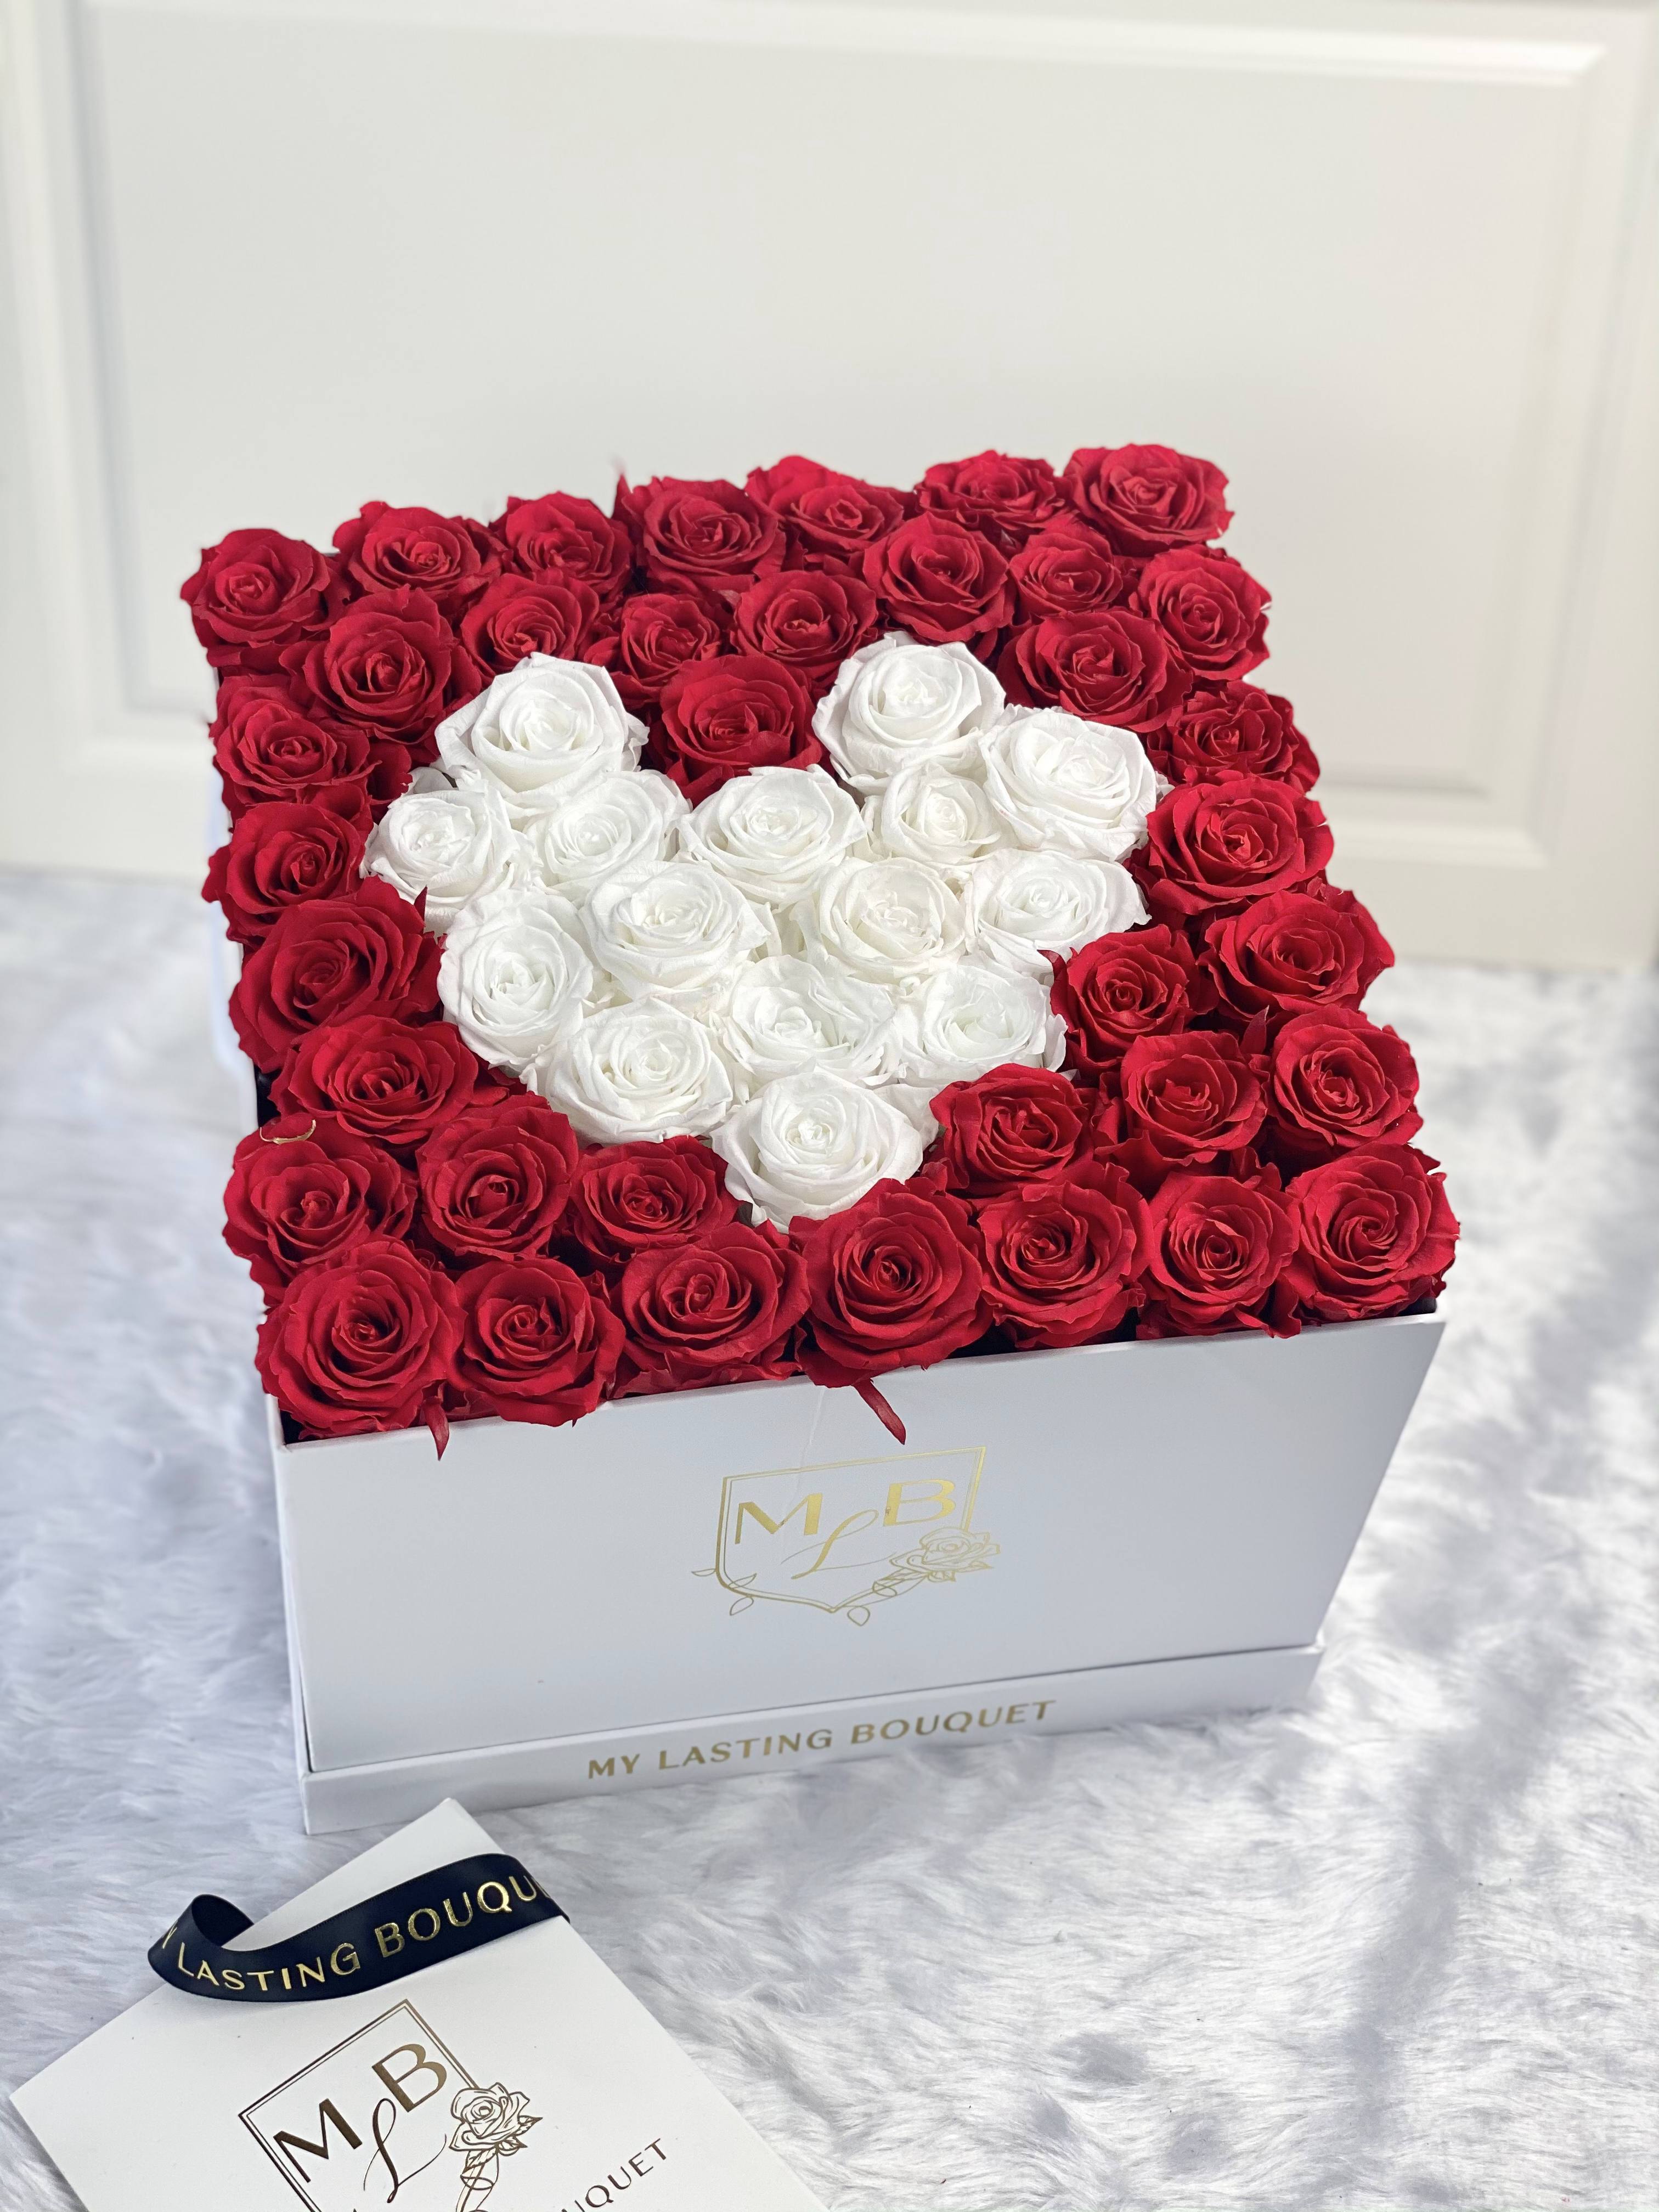 Heart- Red & White Roses - My Lasting Bouquet